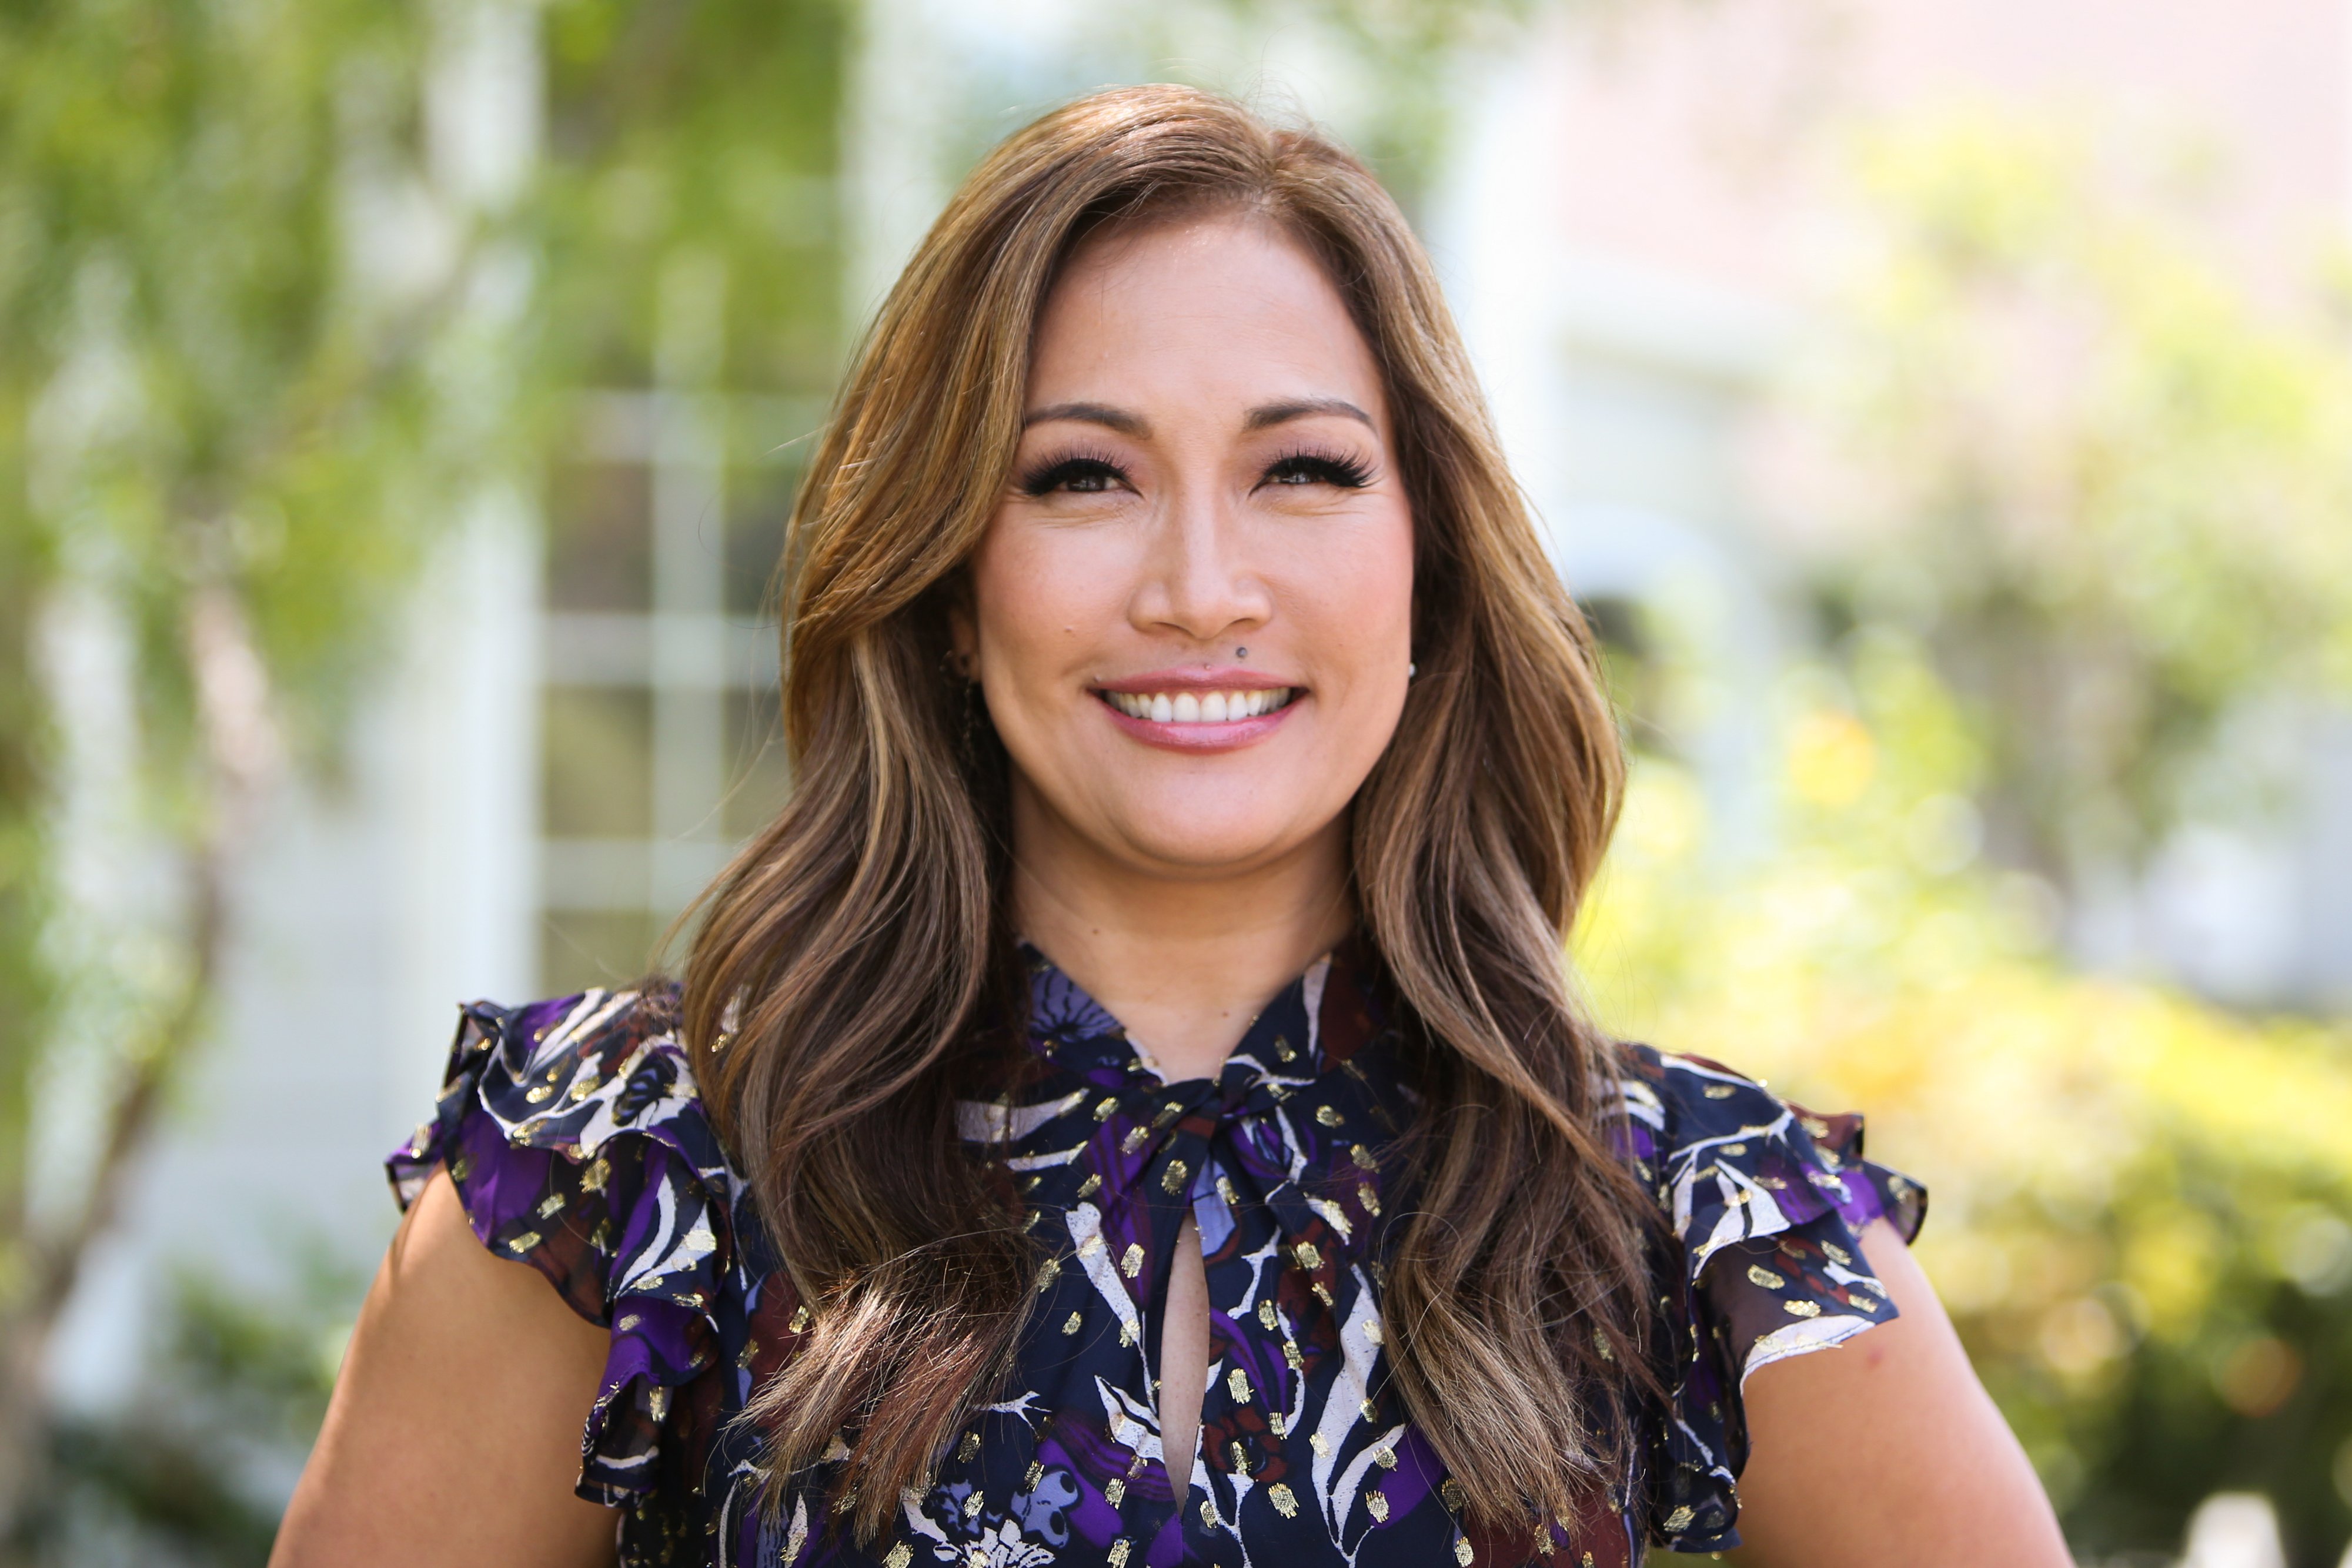 Carrie Ann Inaba visits Hallmark's "Home & Family" at Universal Studios Hollywood on May 3, 2019 | Photo: GettyImages